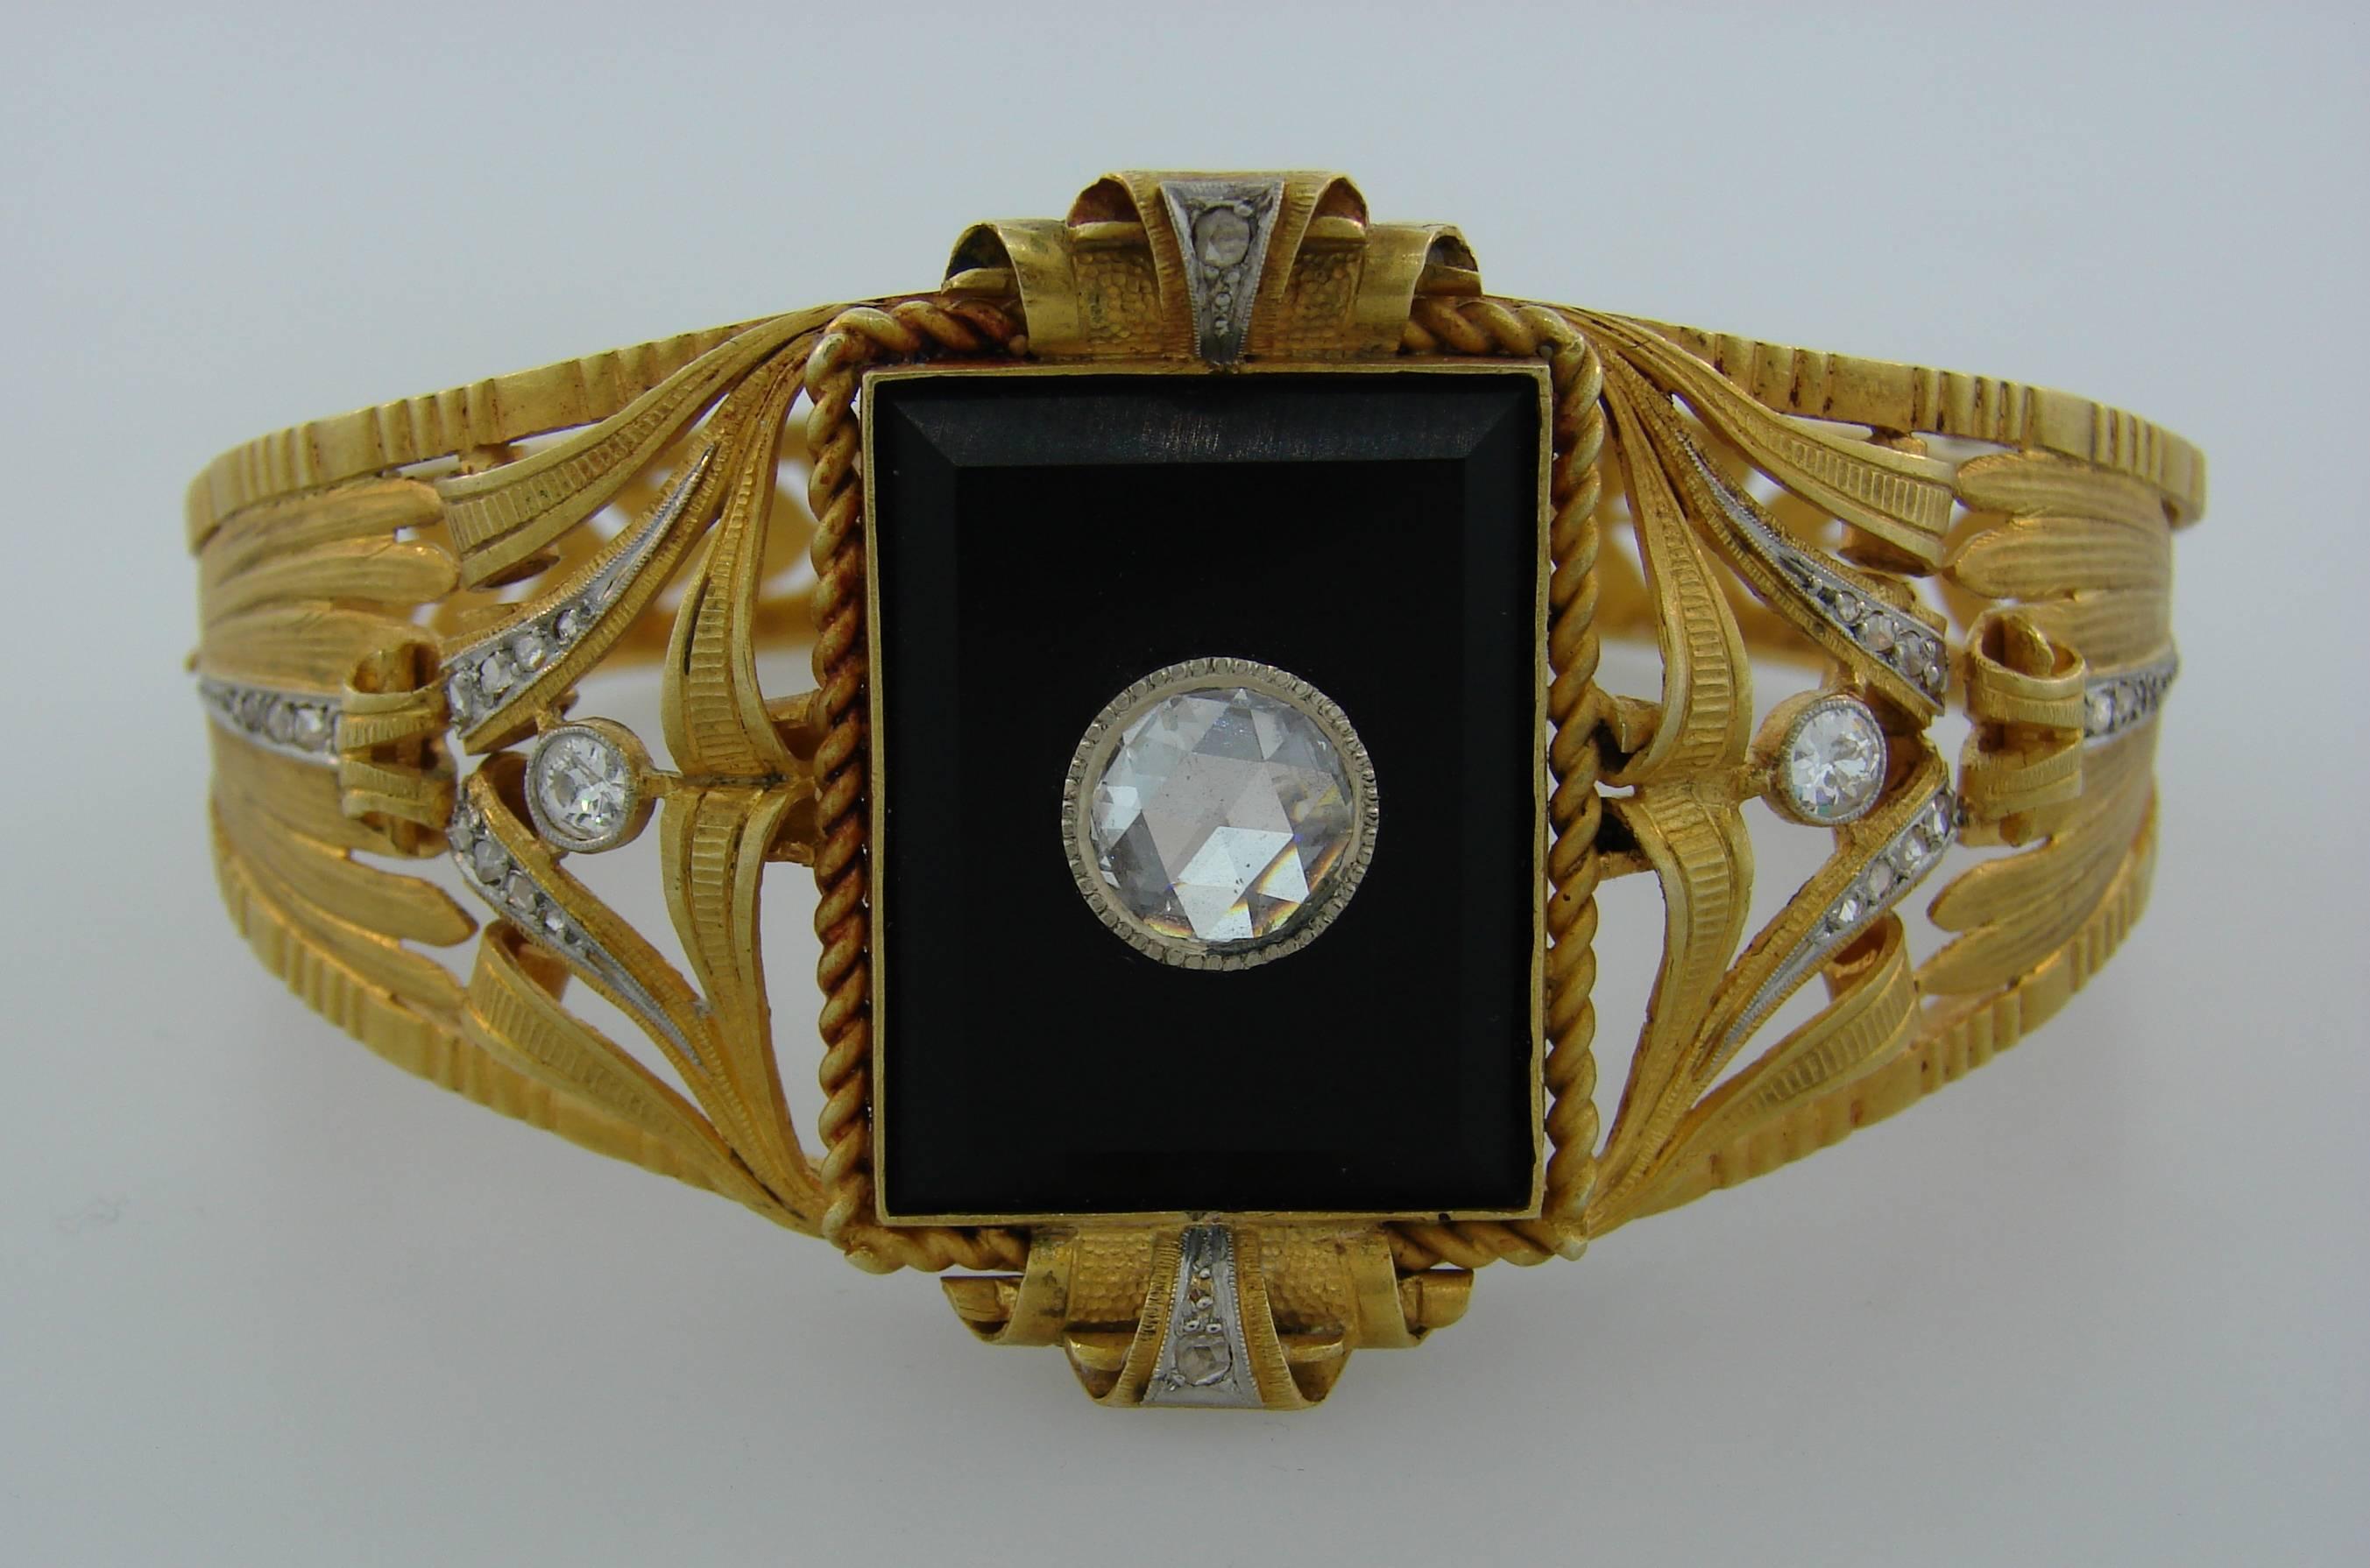 Gorgeous Victorian bangle bracelet. Unique and elegant, the bracelet is a great addition to your jewelry collection. 
It is made of 18 karat (tested) yellow gold and features a rectangular black onyx accented with a large rose cut diamond in the